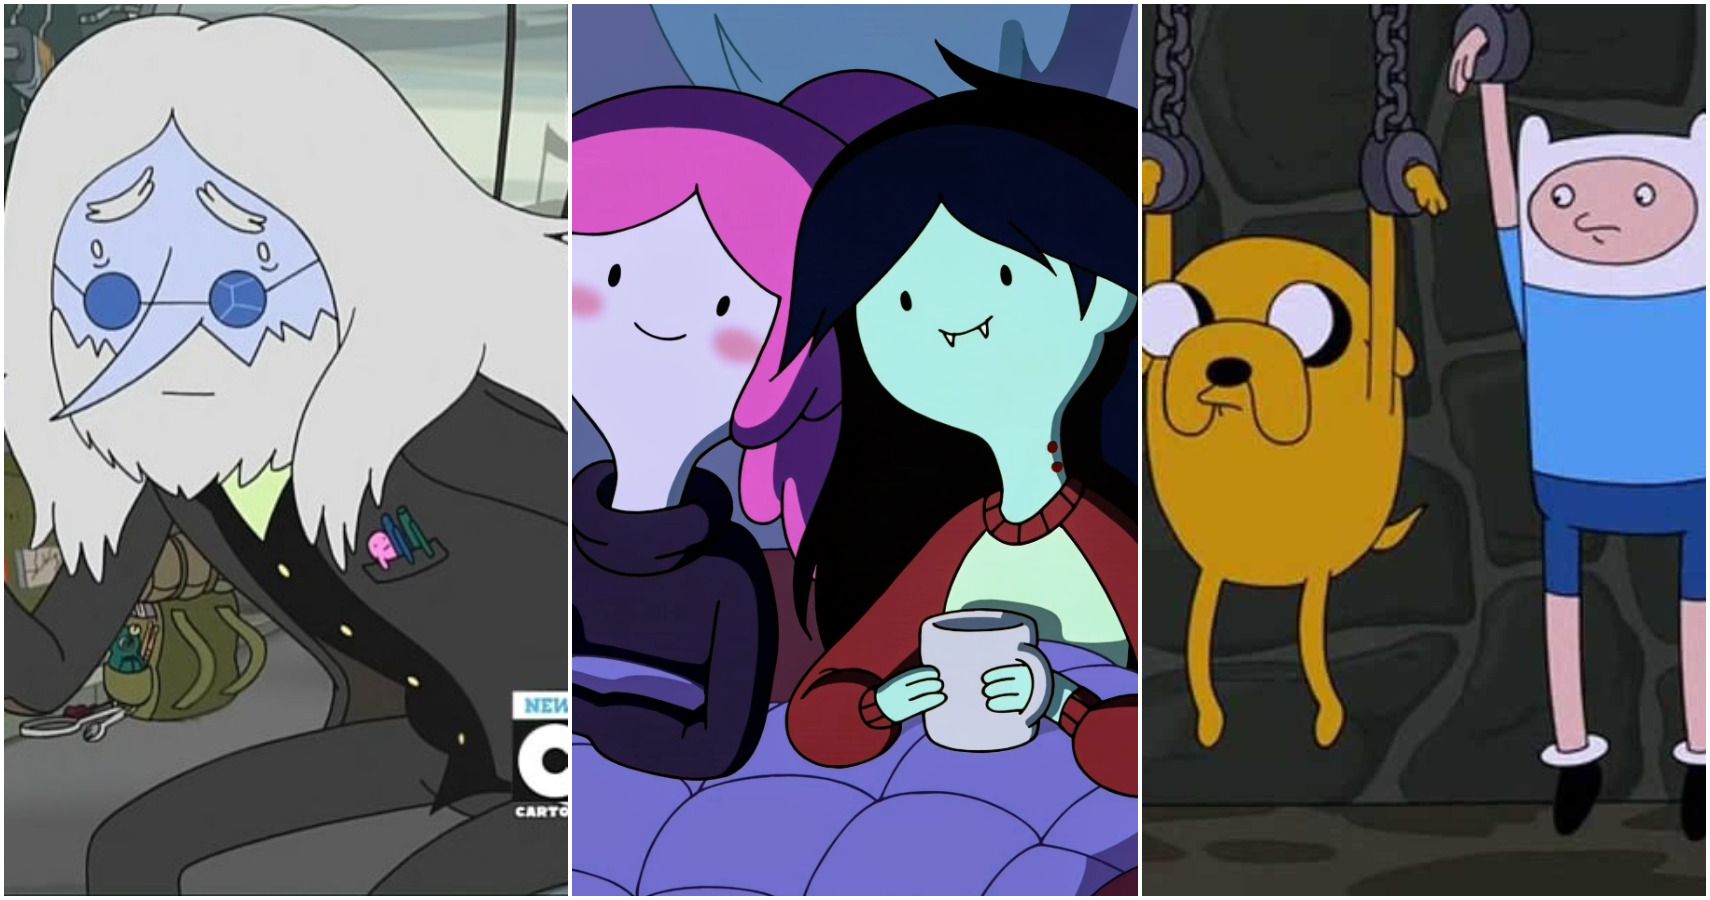 Adventure Time: 10 Things You Never Knew About The Influential Cartoon